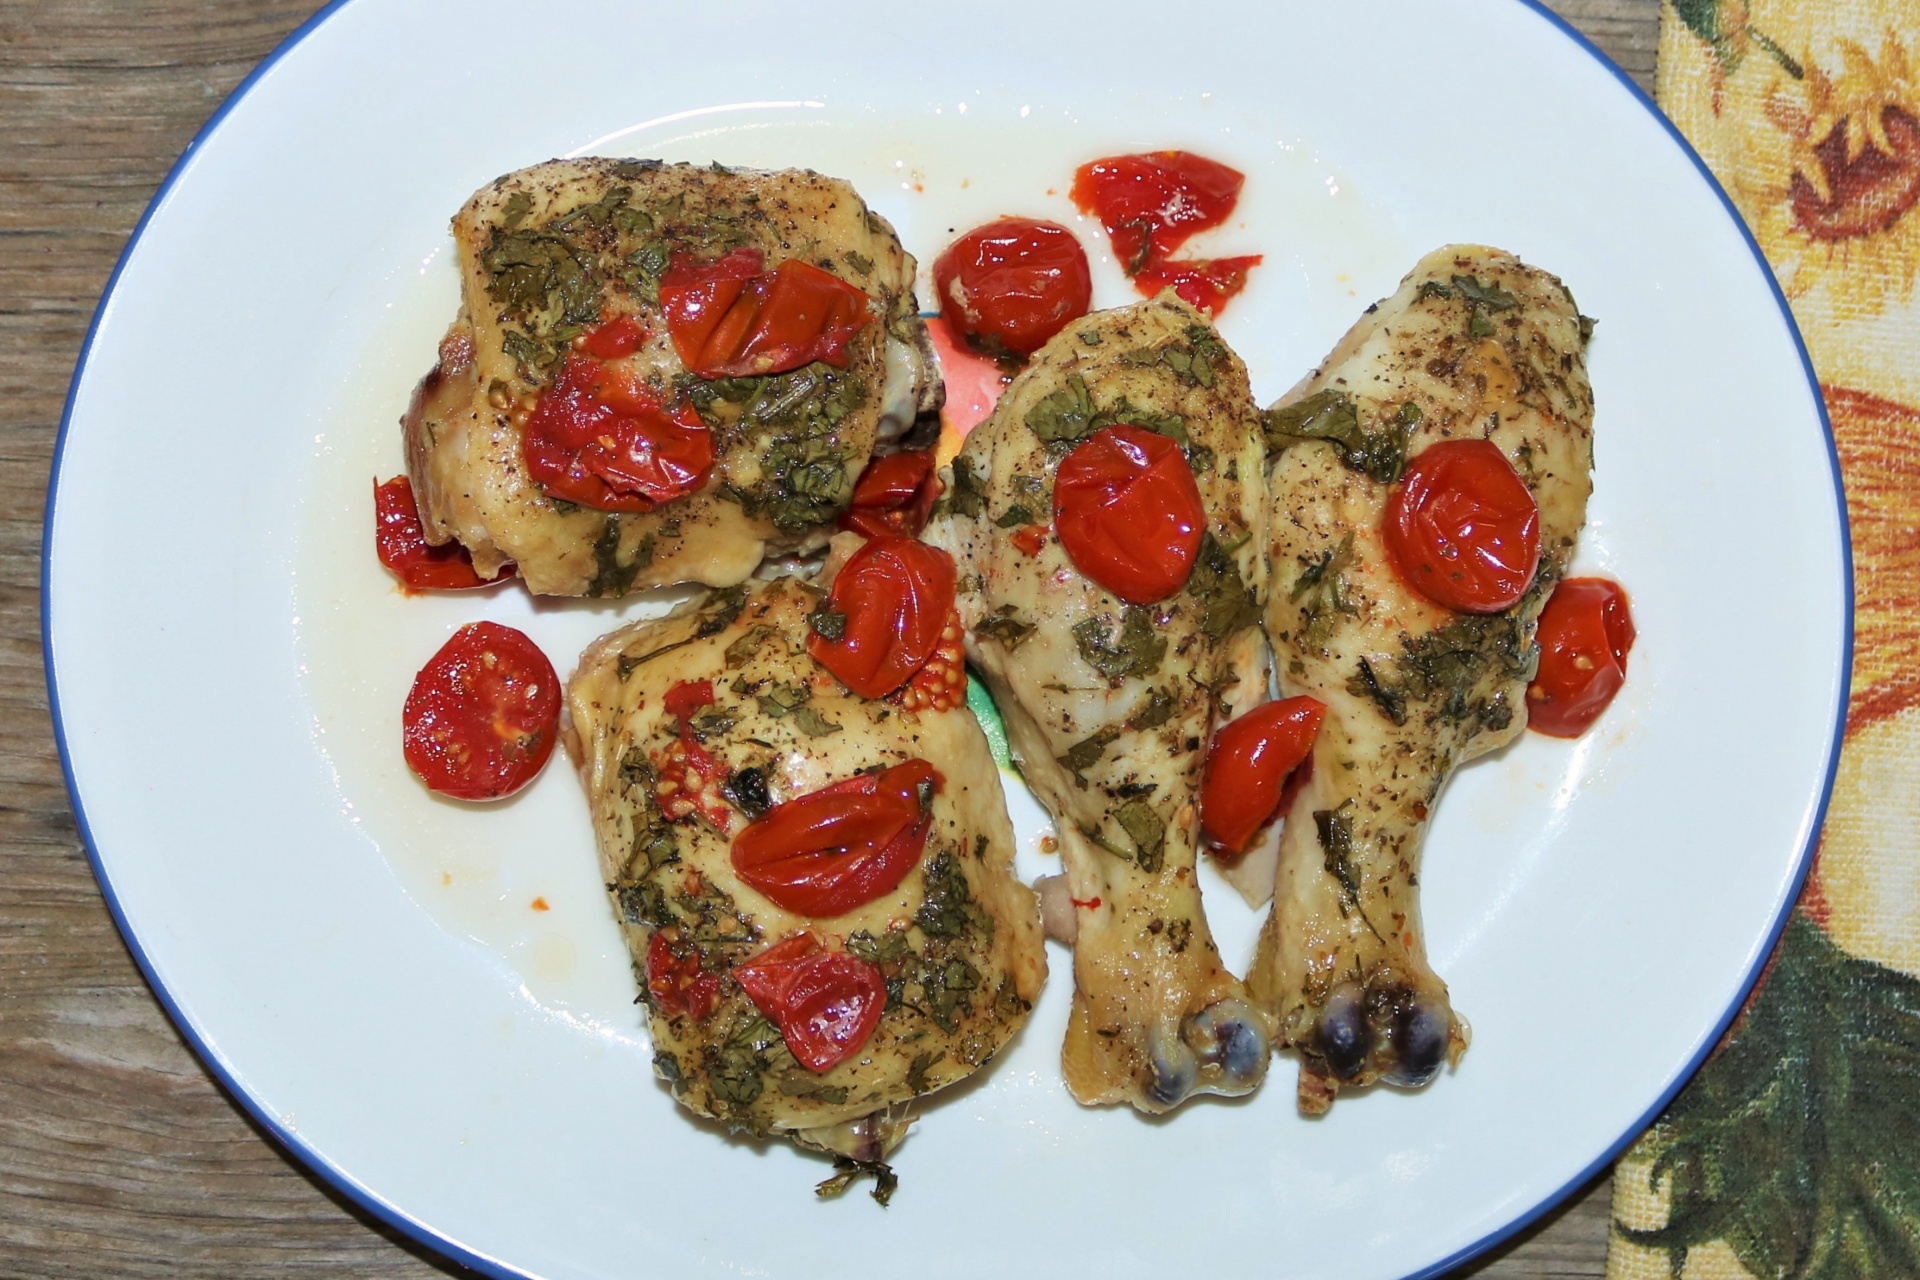 Top view of cooked chicken pieces with cherry tomatoes and spices on a white plate.